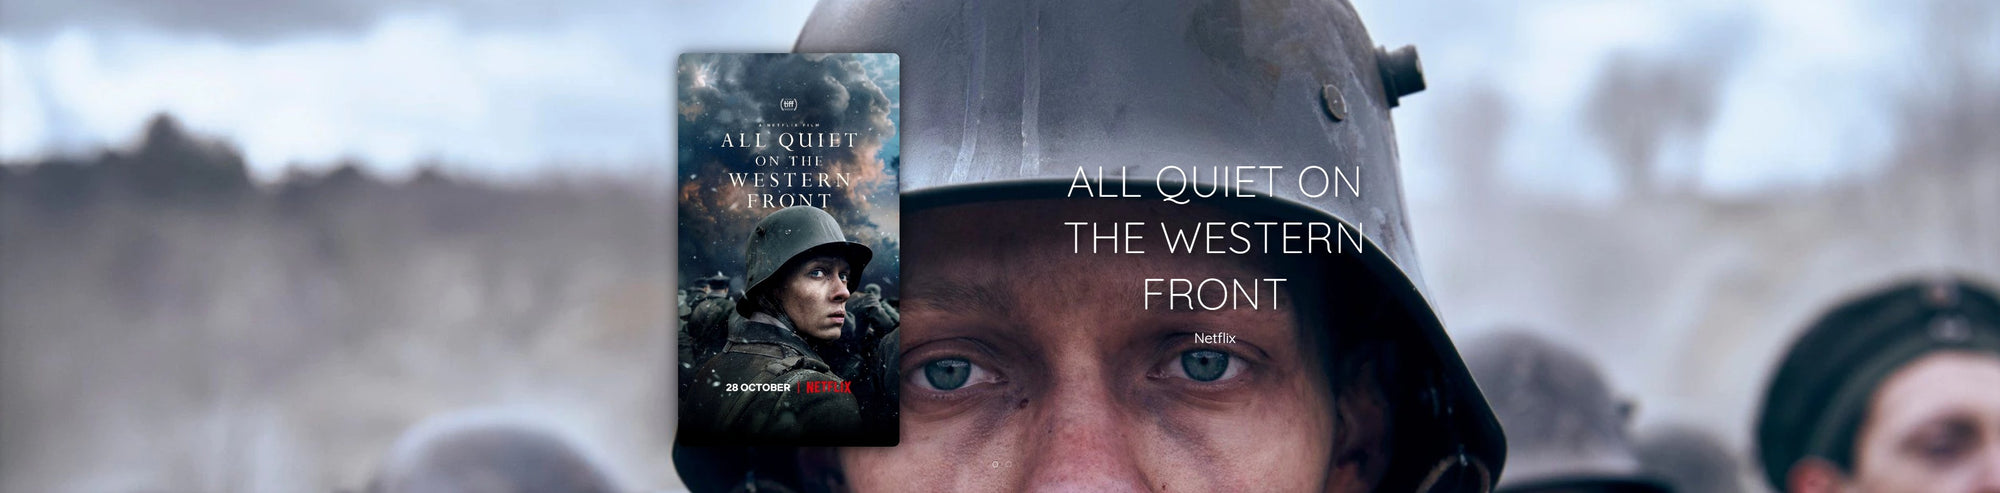 It won the Oscar for Best Cinematography! eMotimo controllers helped shoot Netflix's All Quiet on the Western Front. - eMotimo